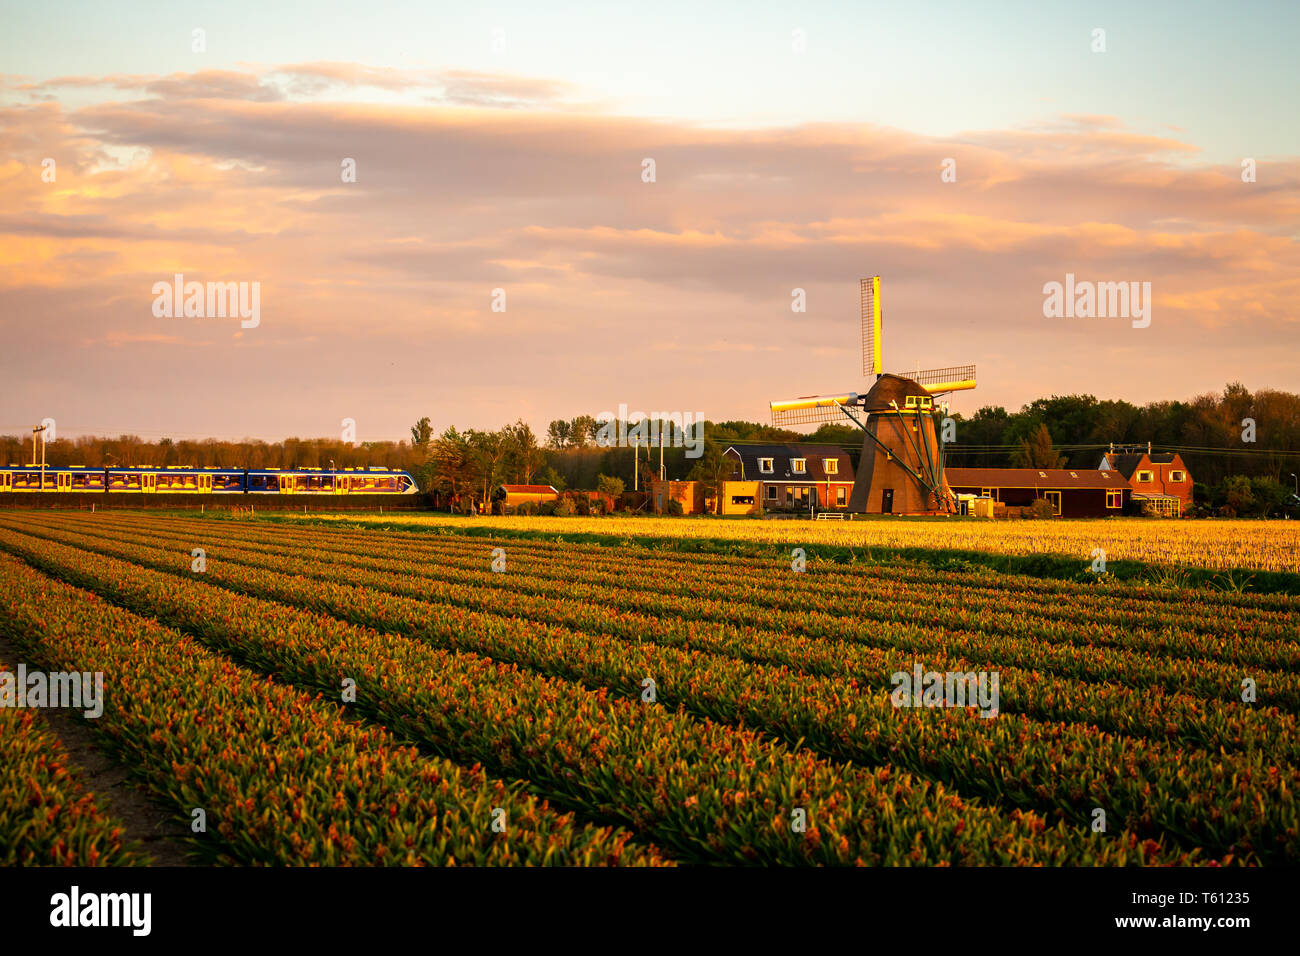 Dutch agriculture field with windmill at sunset Stock Photo